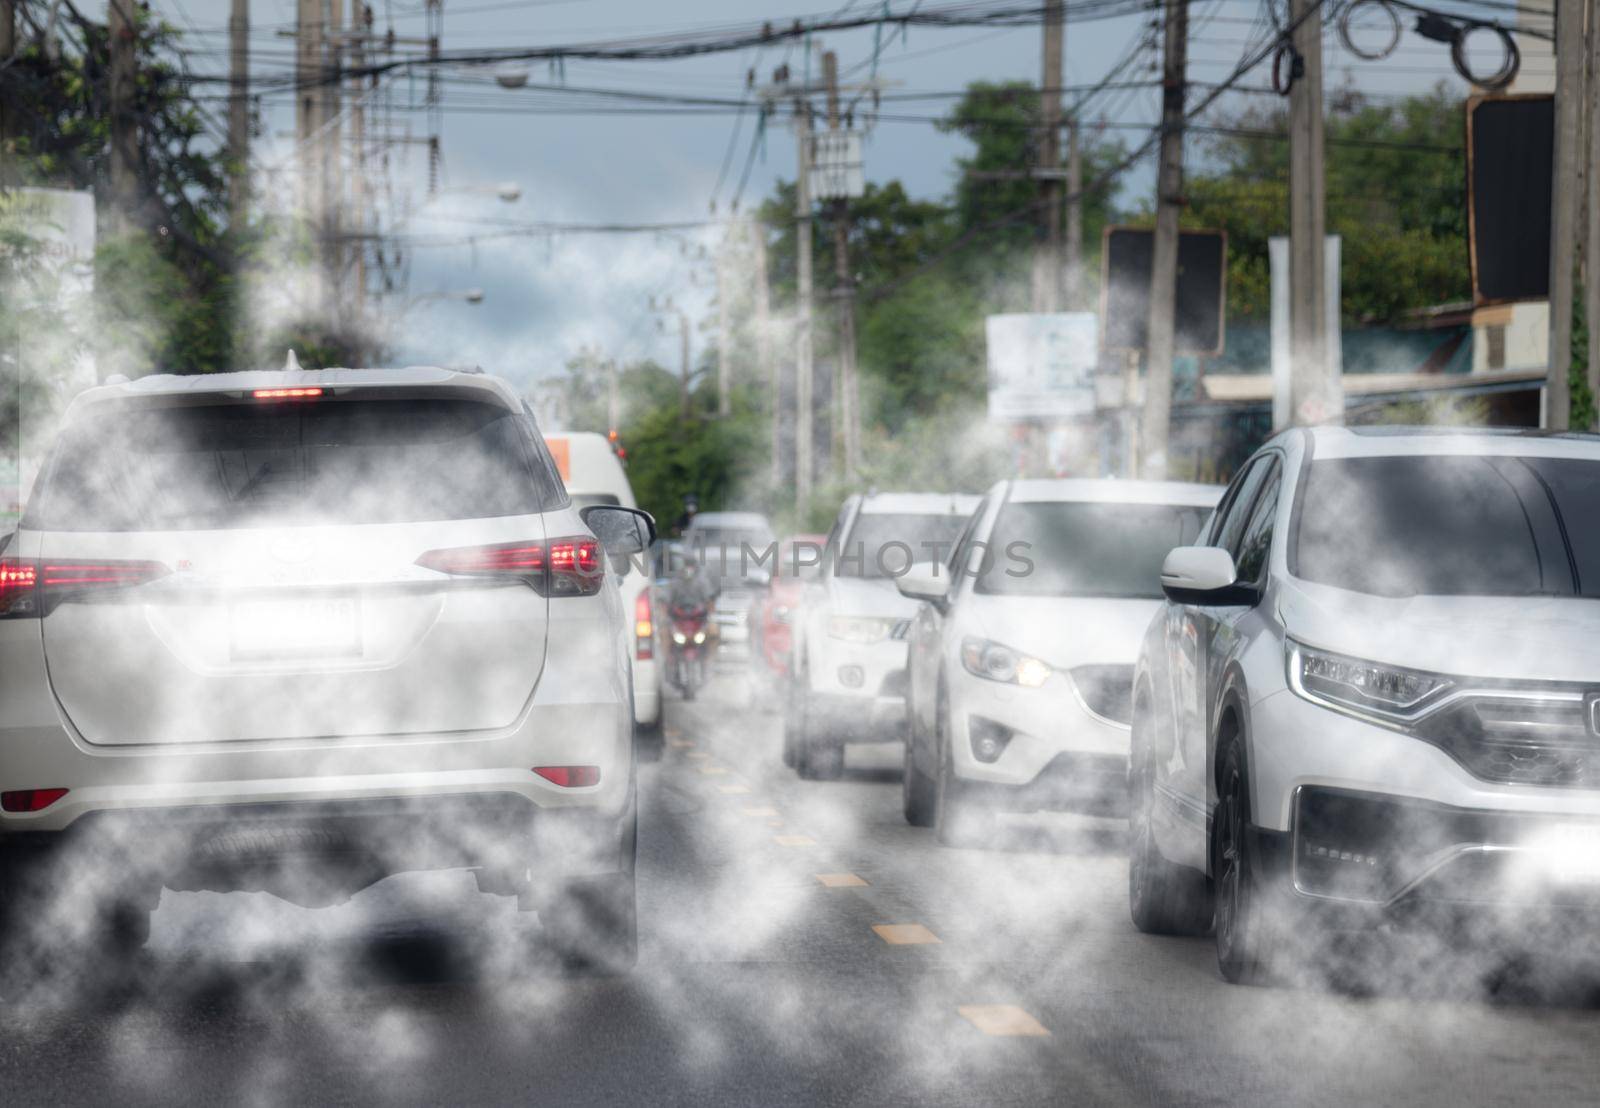 Car exhaust fumes during traffic jams on the road cause environmental emissions.